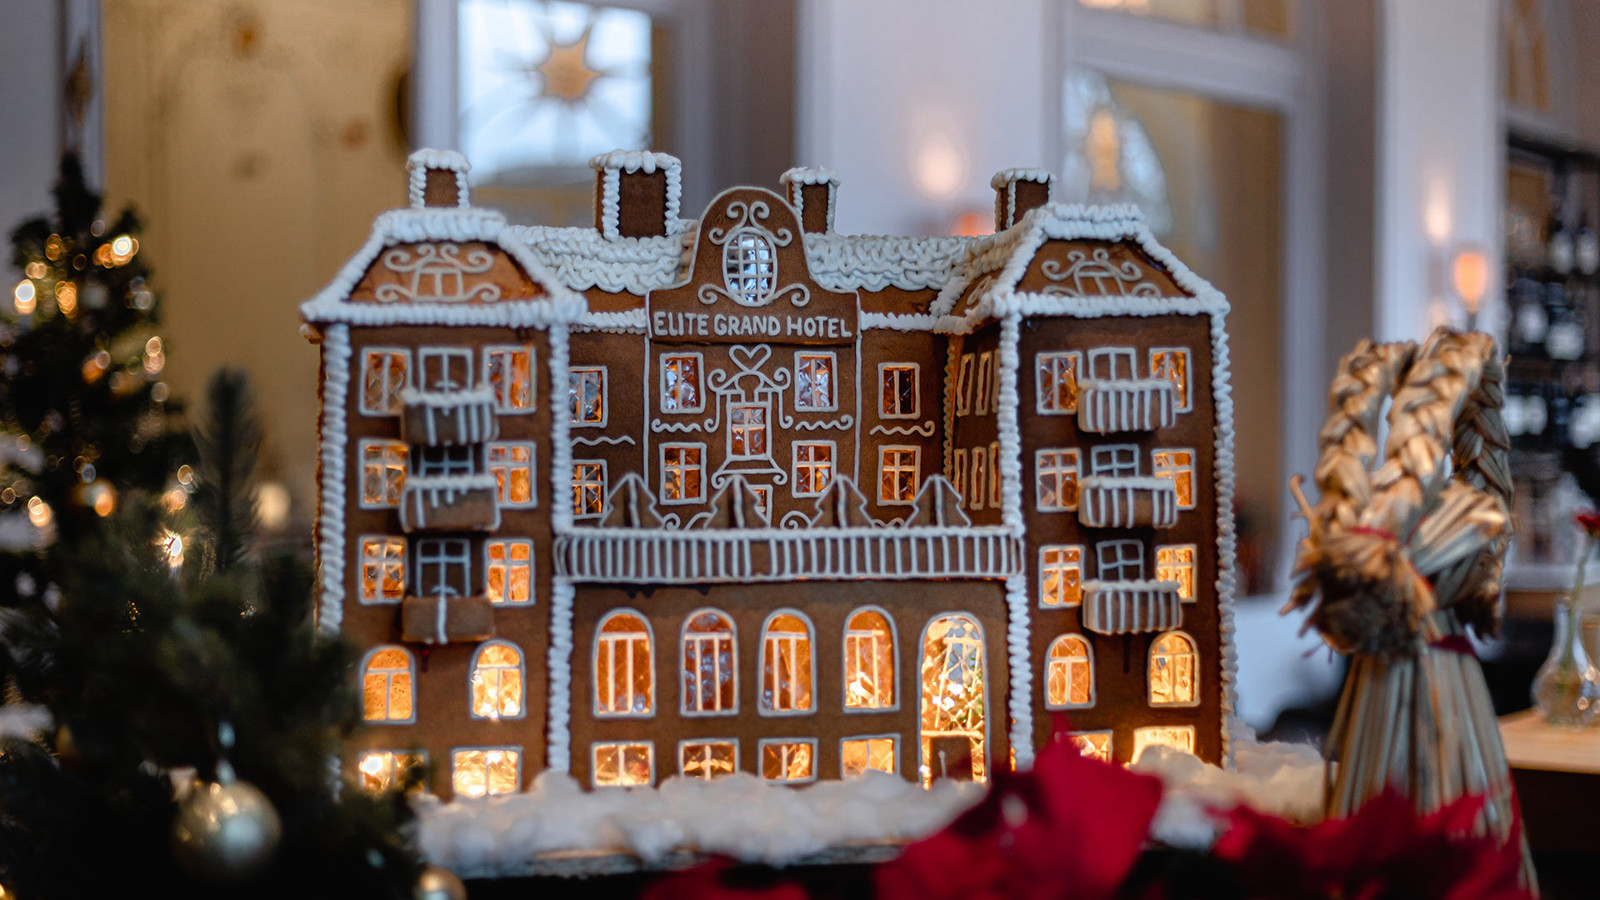 A beautifully decorated gingerbread house